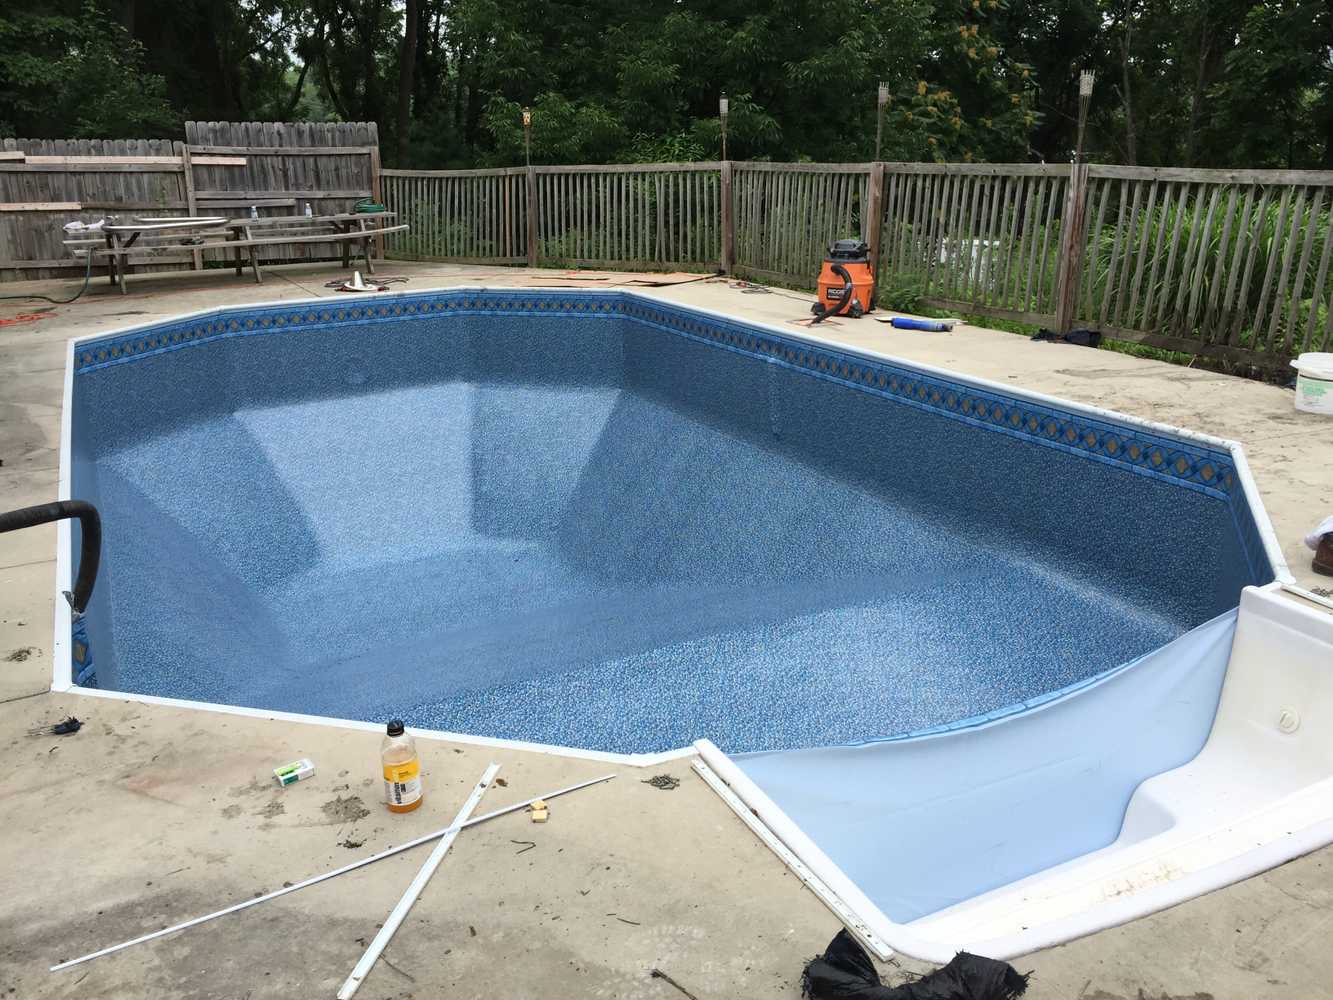 Photos from Jl Pool & Spa Services, Llc